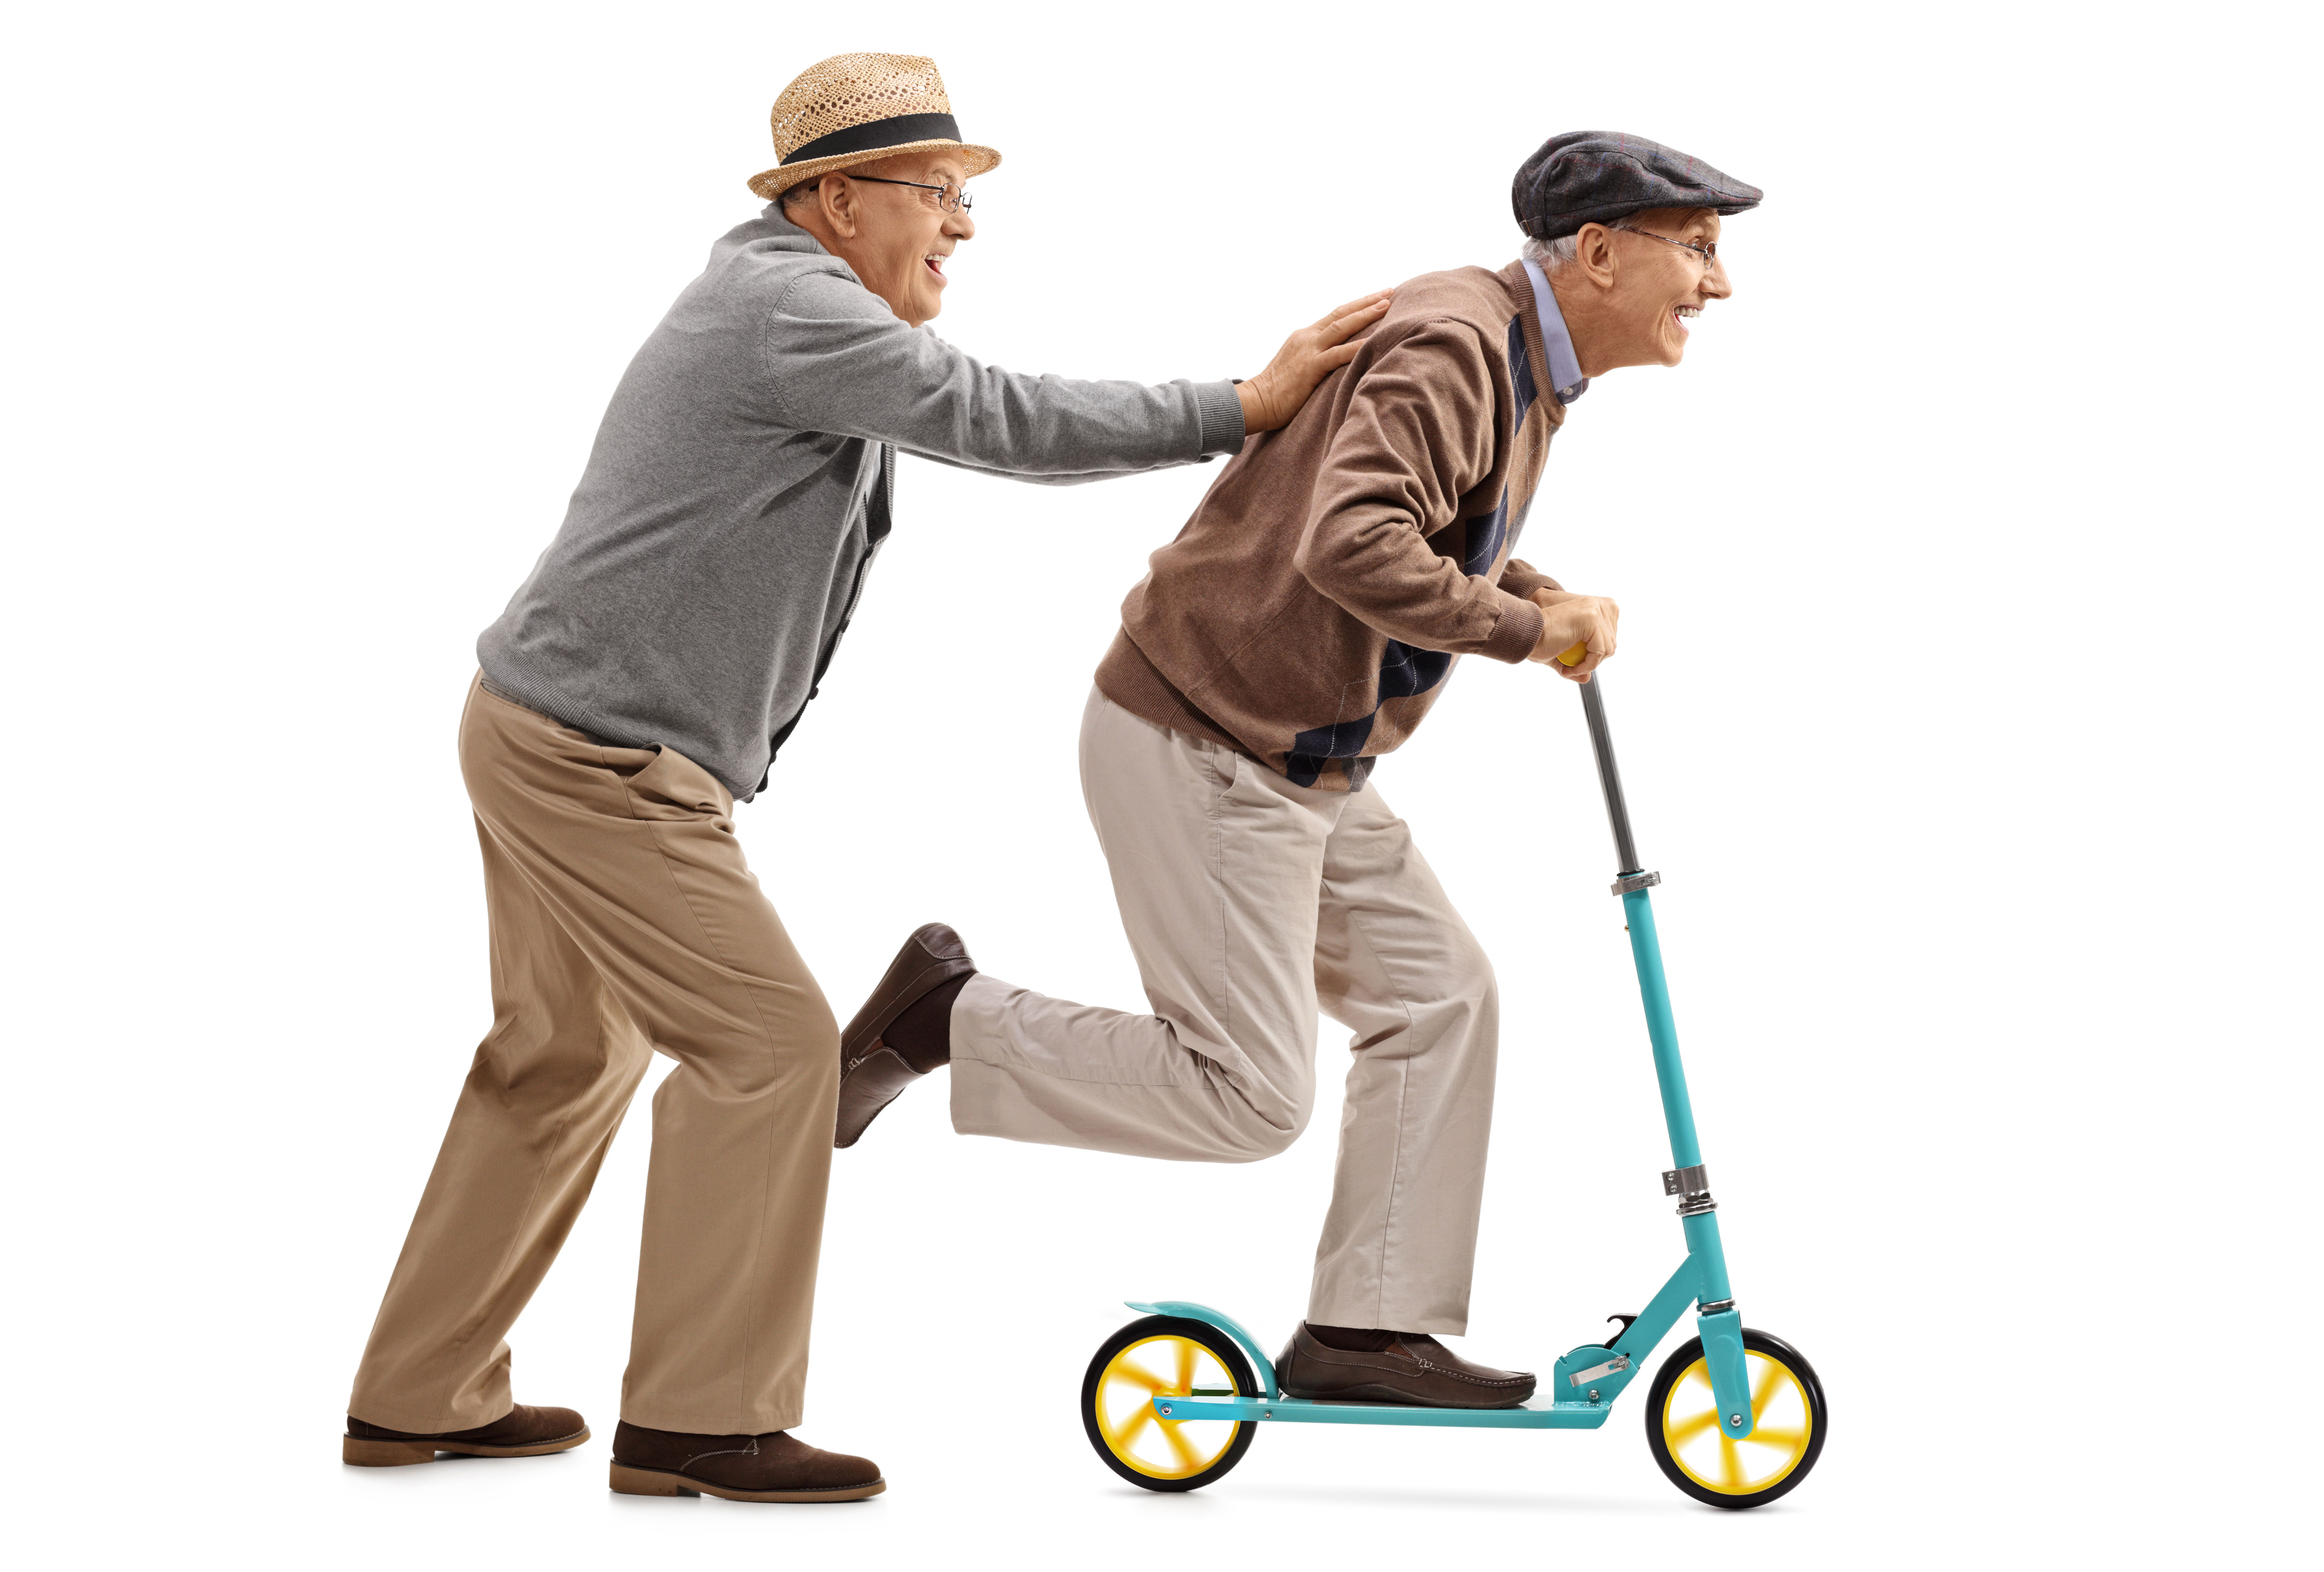 Benefits of Playfulness in Older Adults